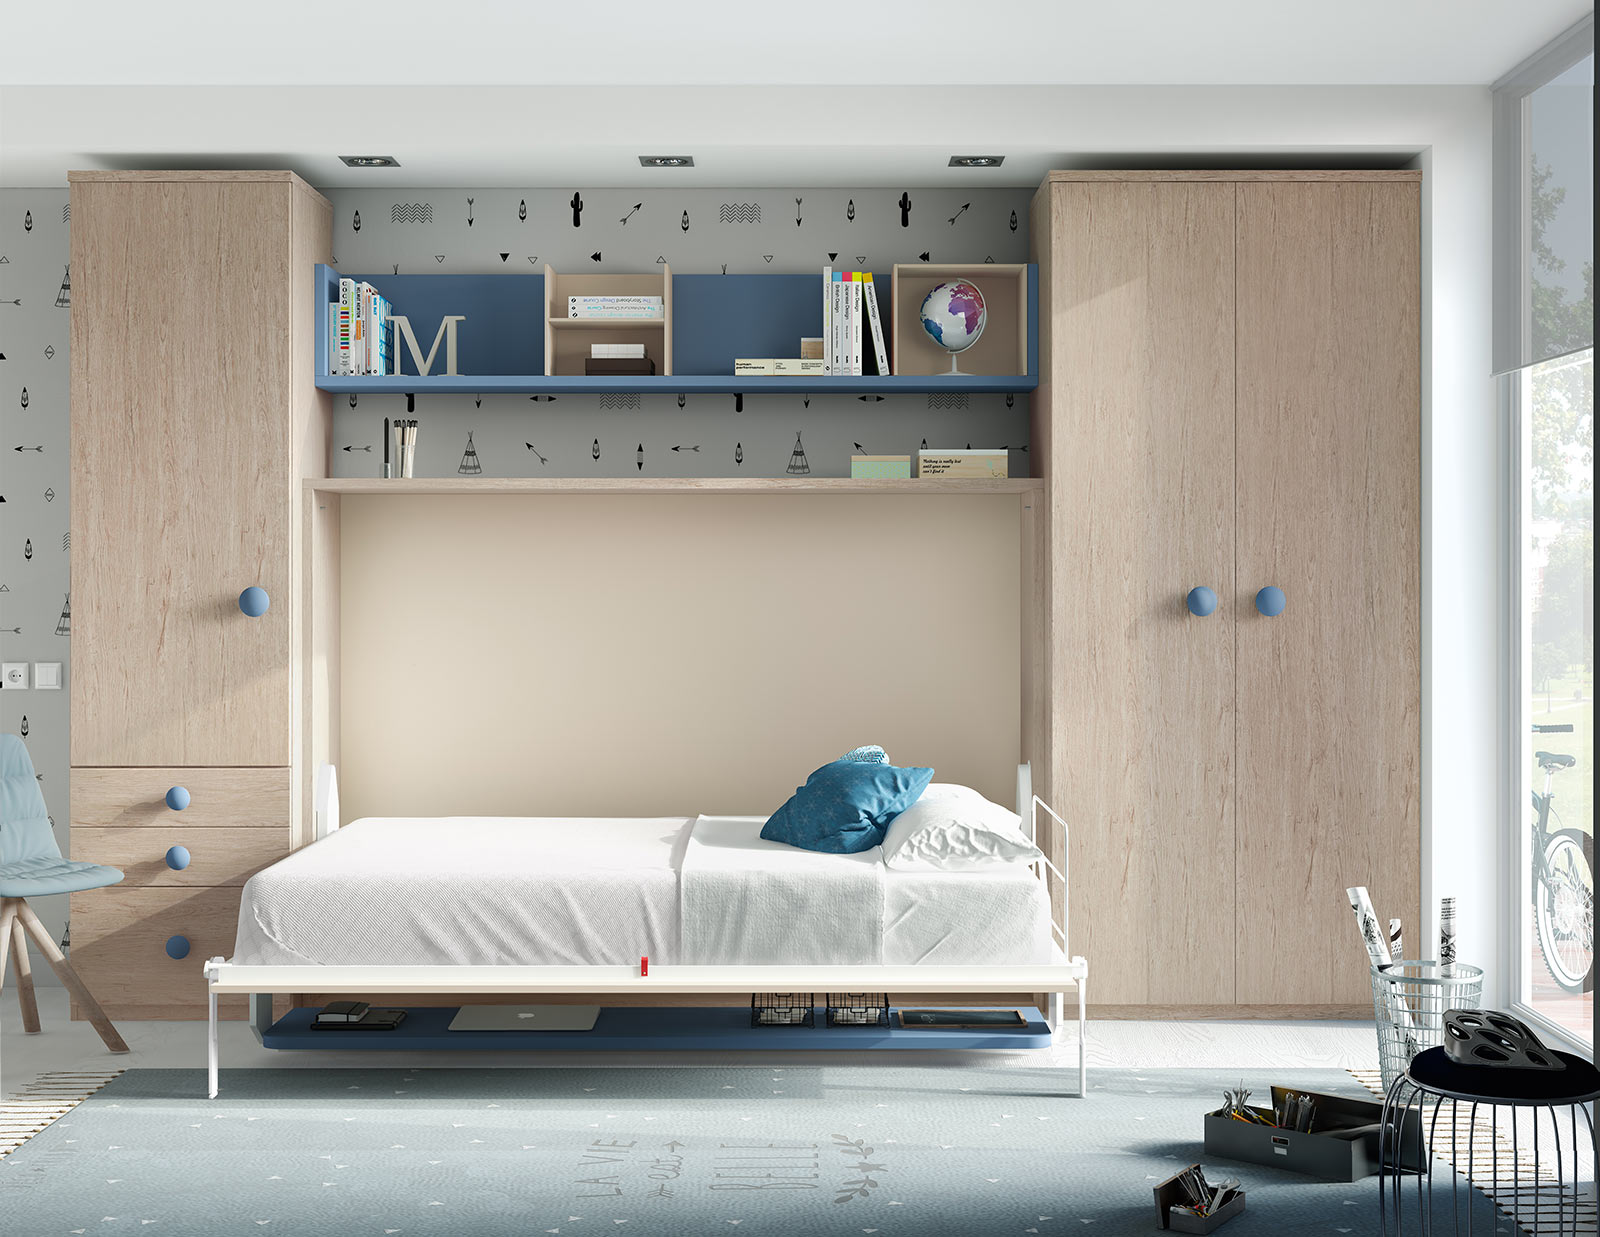 Space Deskbed The London Wallbed Company